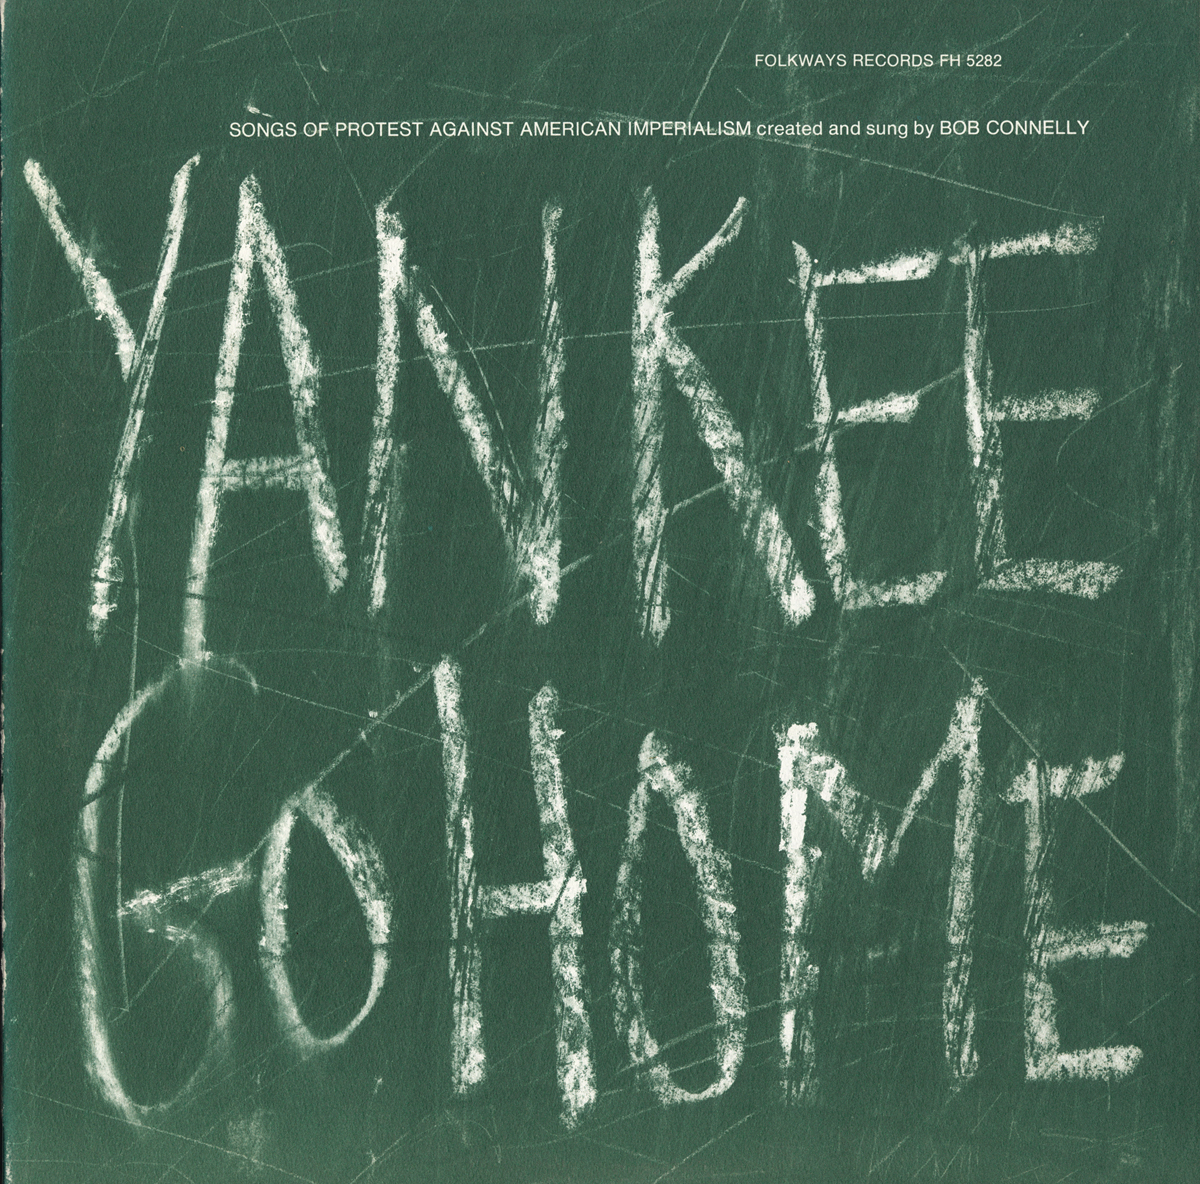 YANKEE GO HOME: SONGS OF PROTEST AGAINST AMERICAN